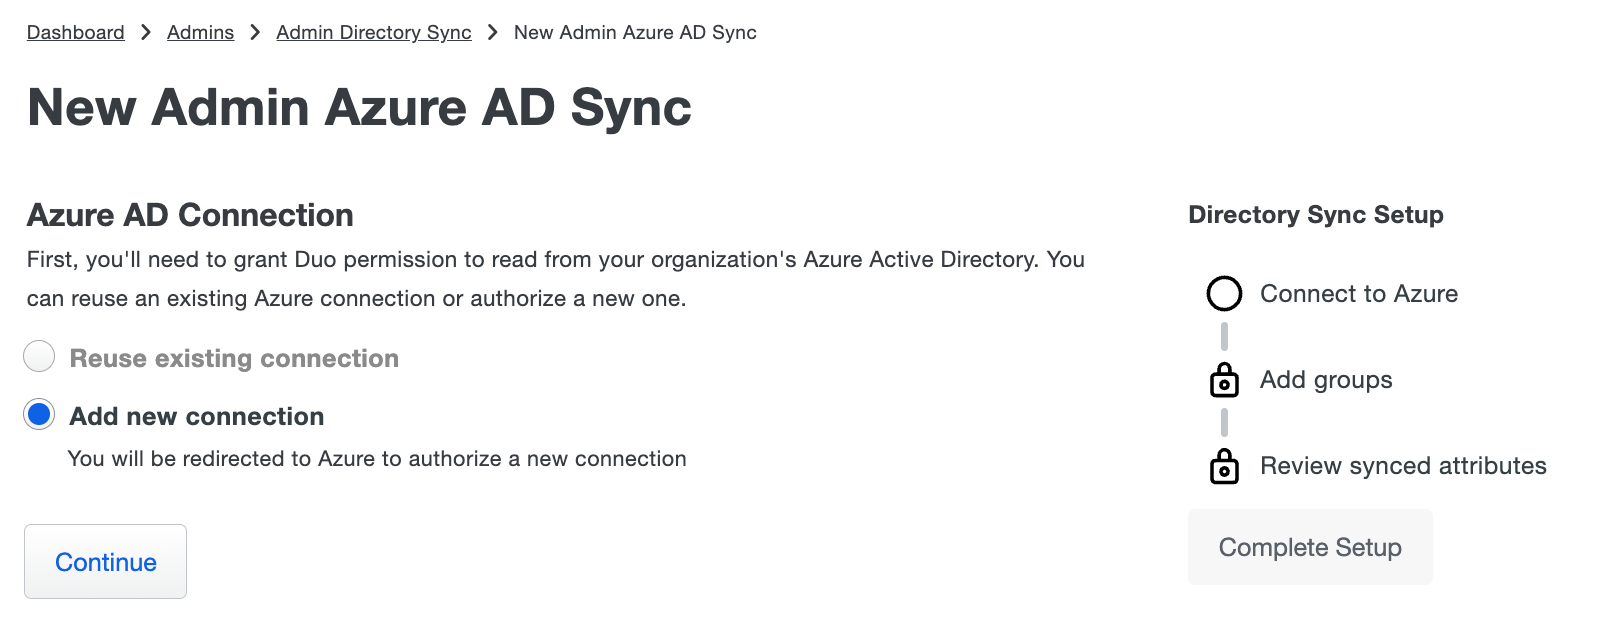 New Admin Azure AD Sync Connection